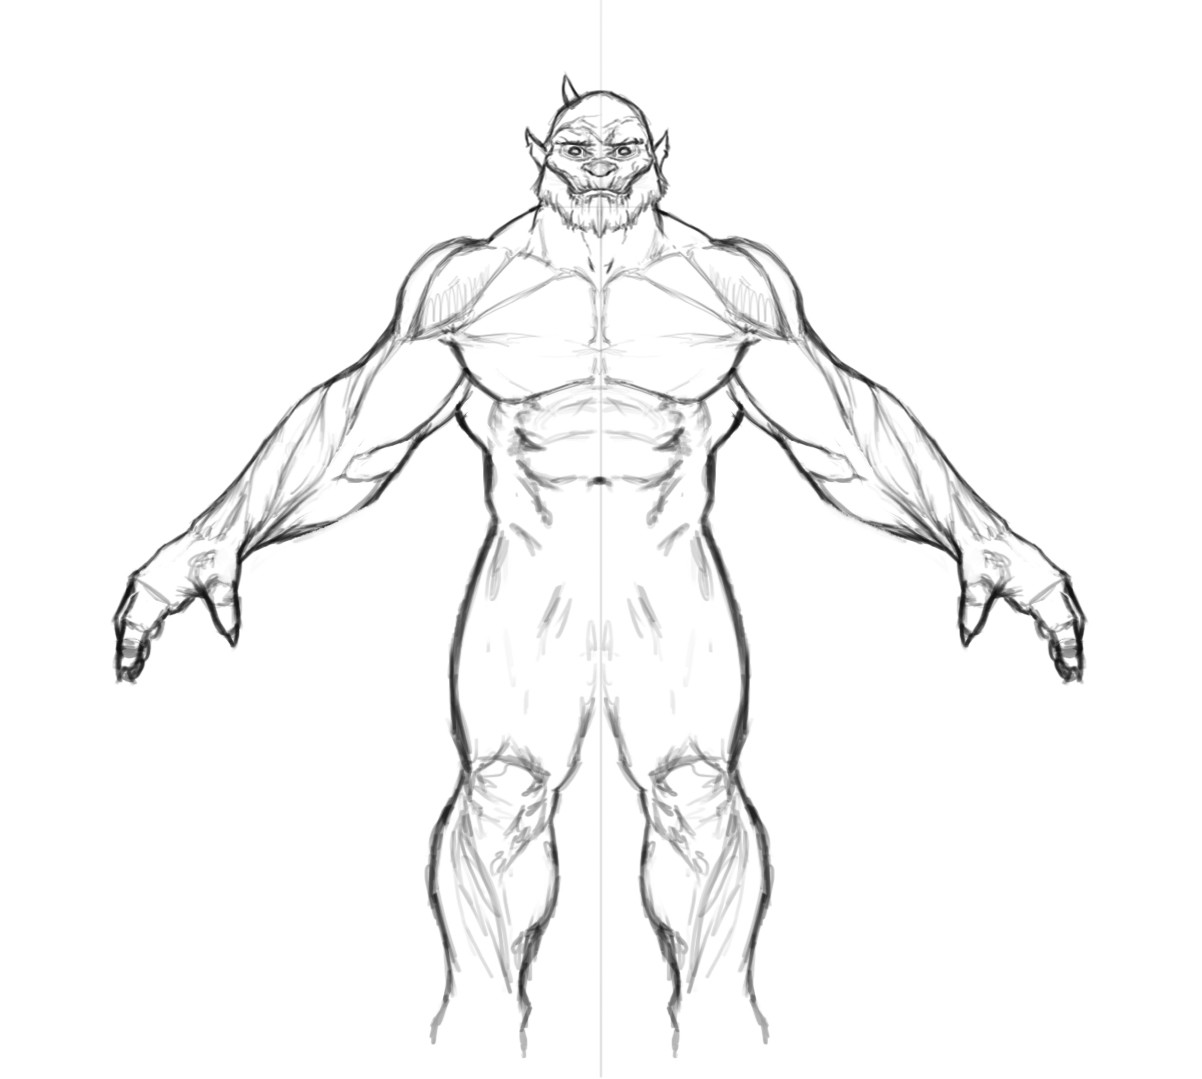 Front Muscle Study.